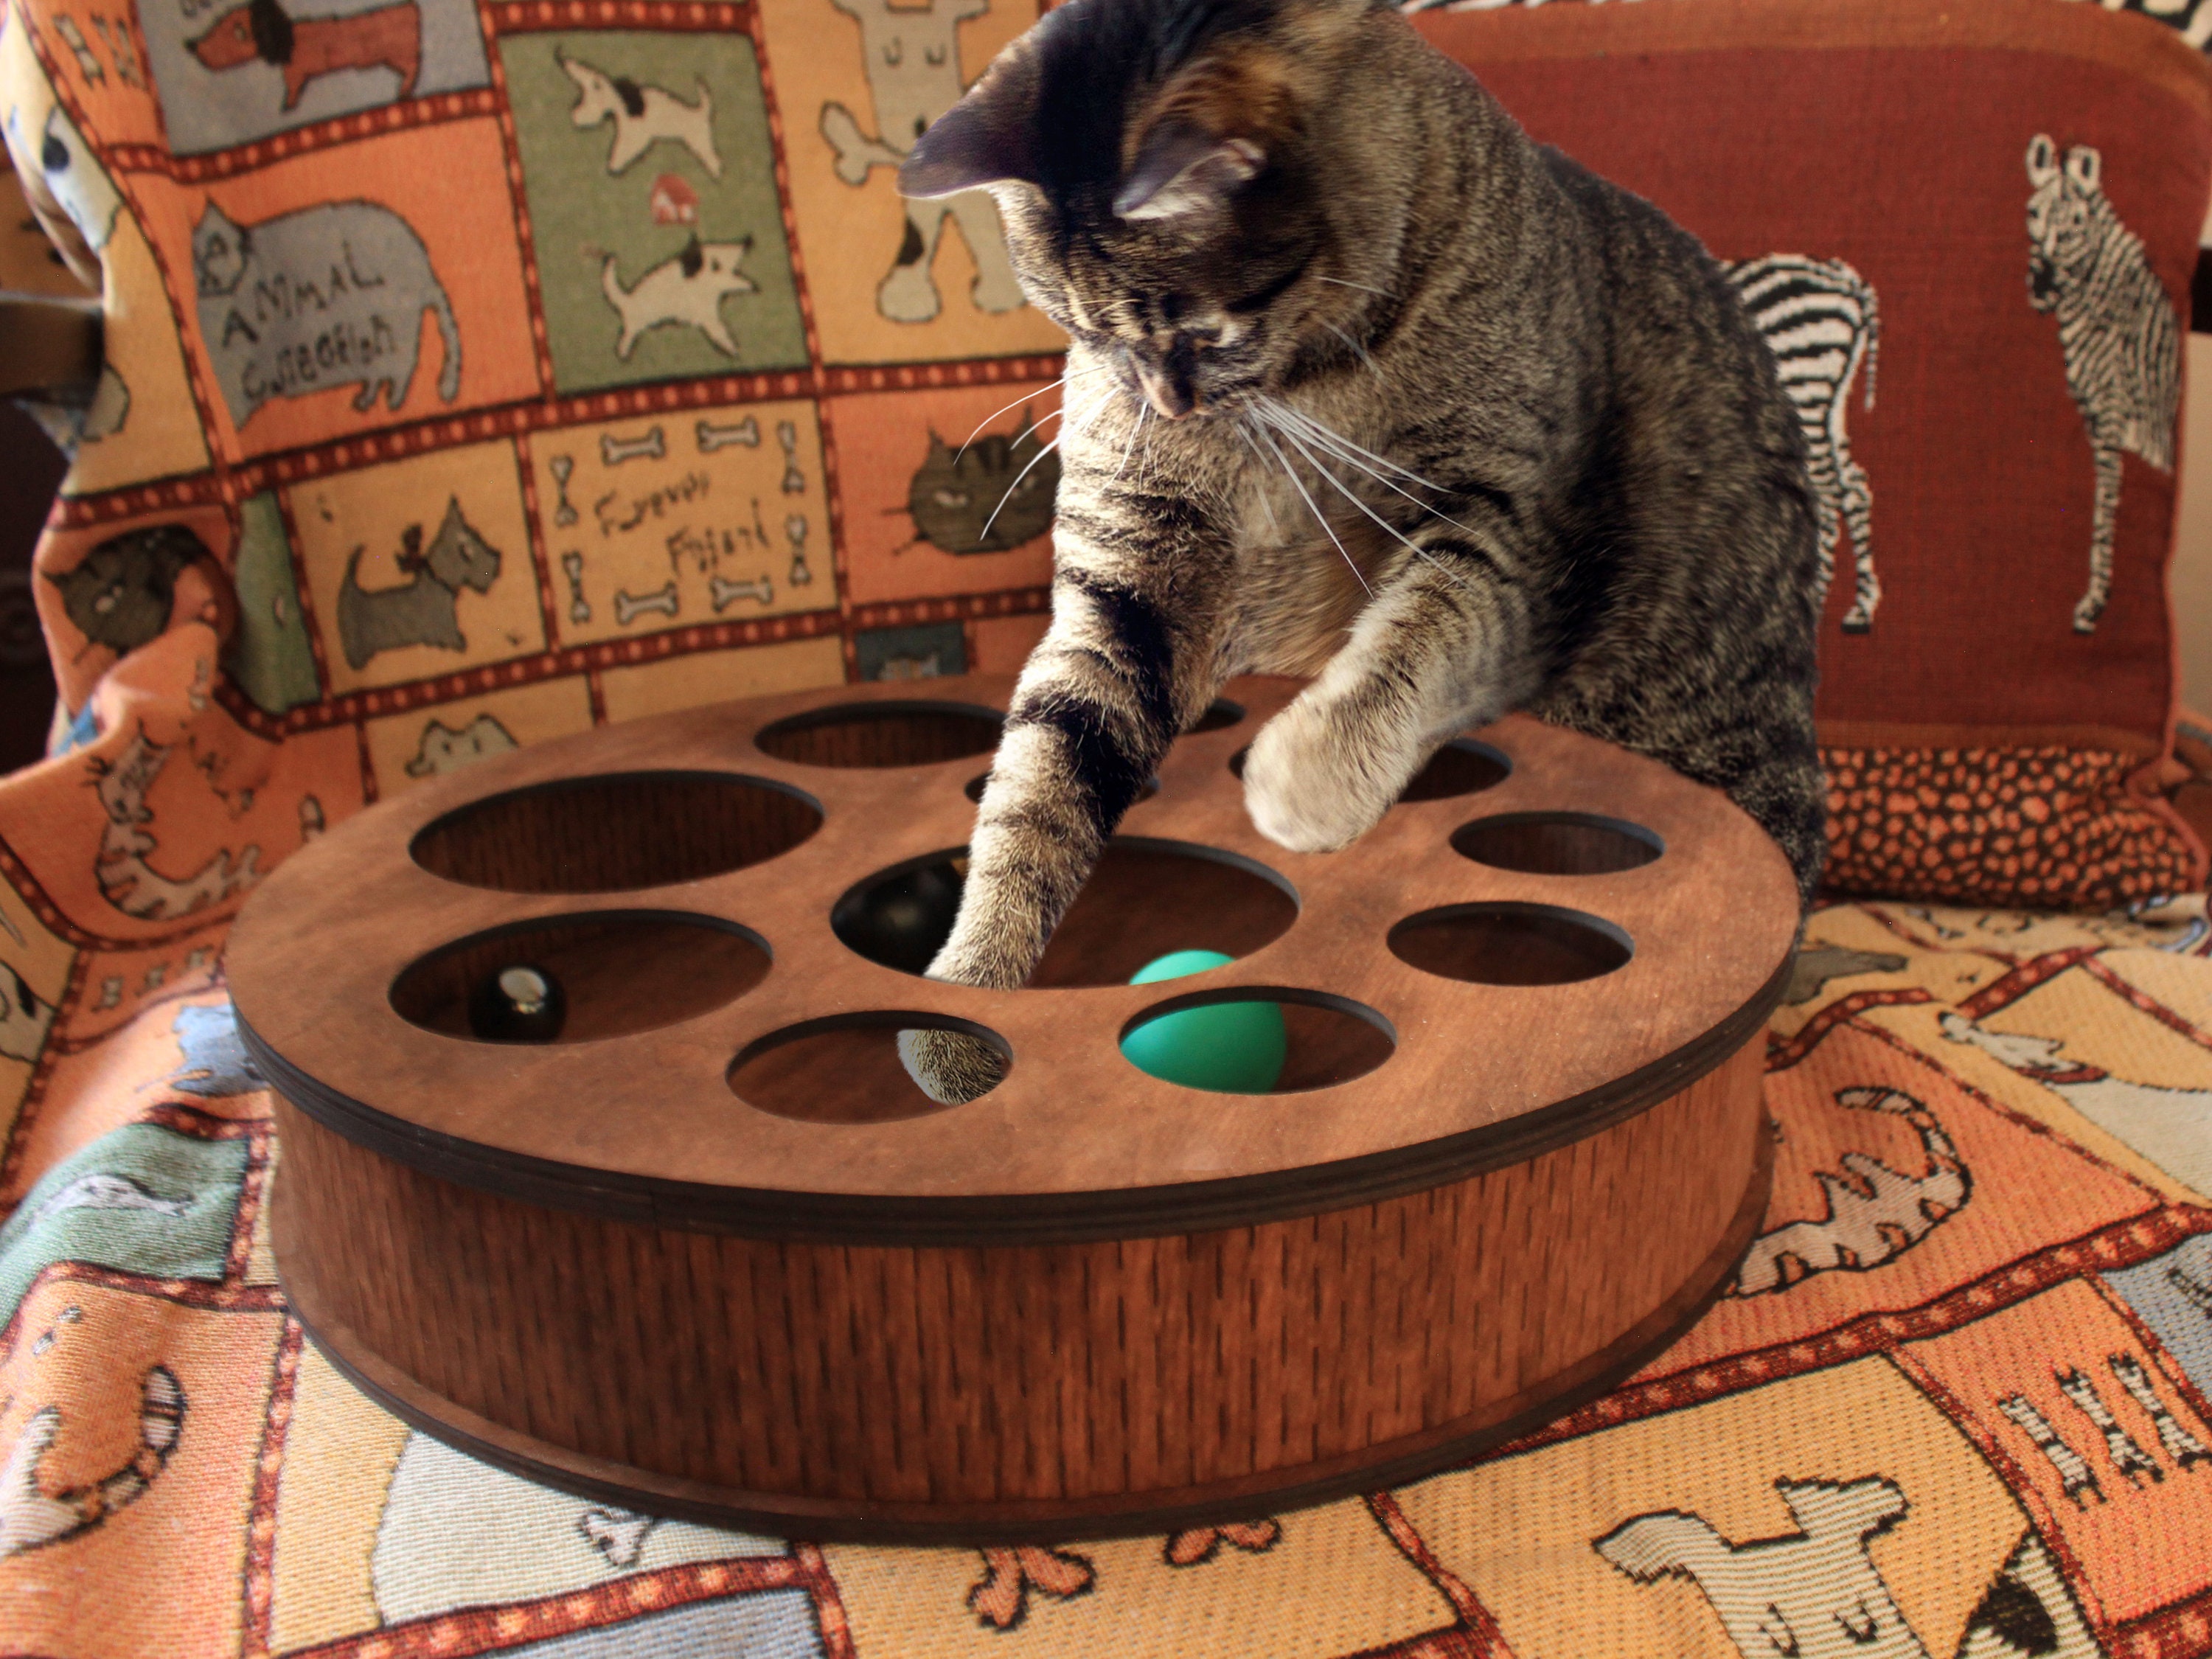 Slow Feeder Cat Bowl Fun Pet Puzzle Feeder Treat Maze Toy Cat Hunting Feeder  Treat Puzzle Toy For Iq Training And Mental Enrichm - Cat Toys - AliExpress